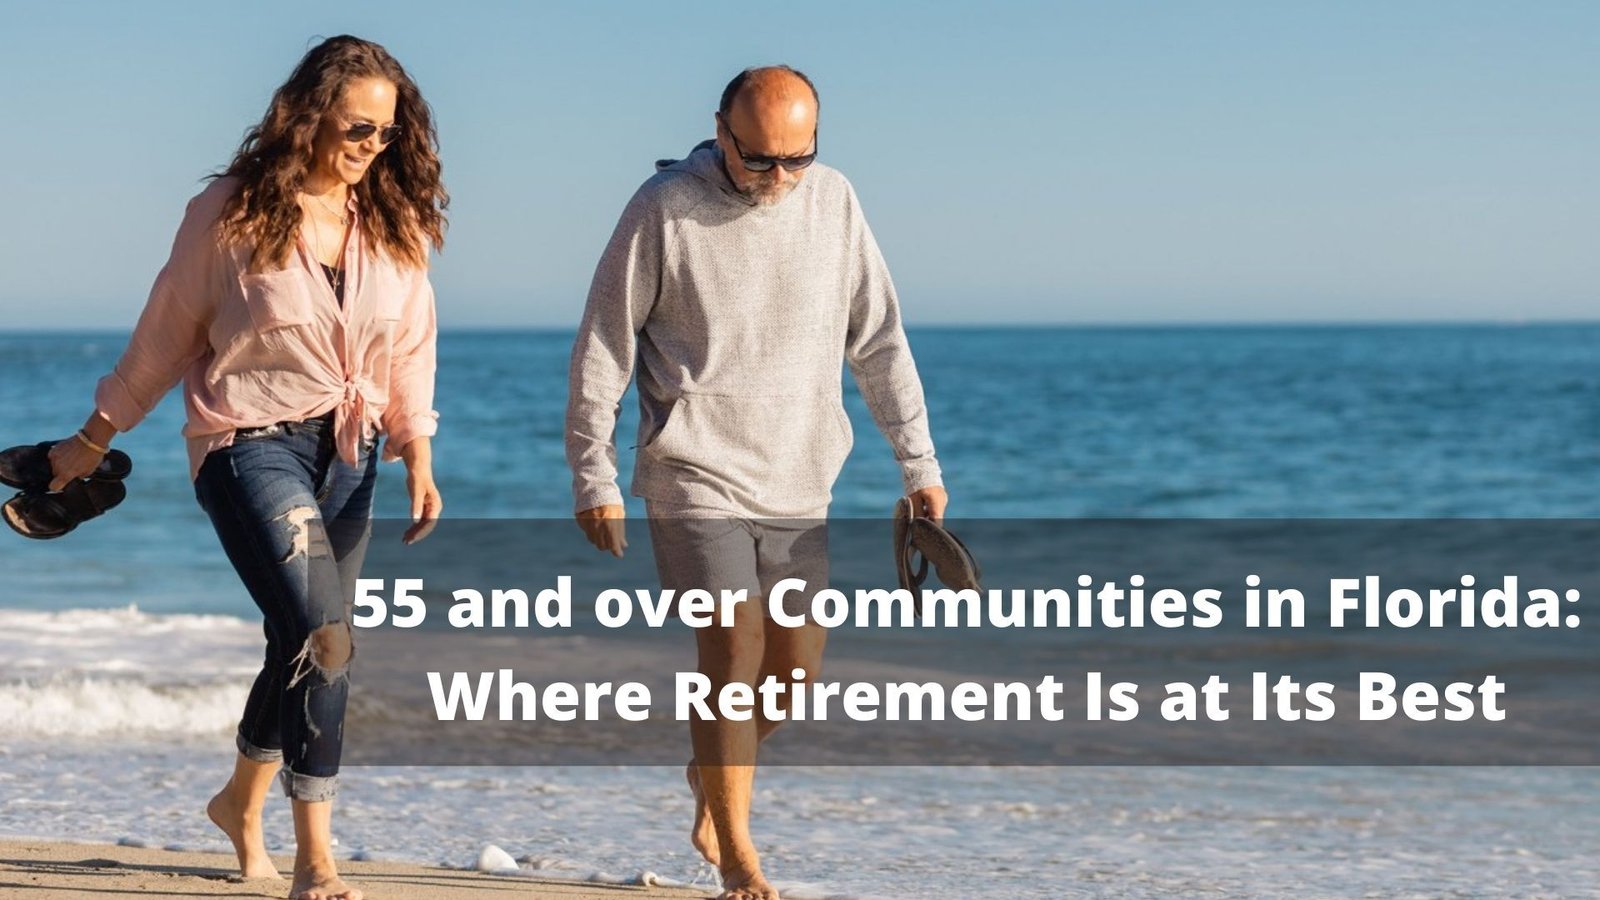 55 and over Communities in Florida Where Retirement Is at Its Best